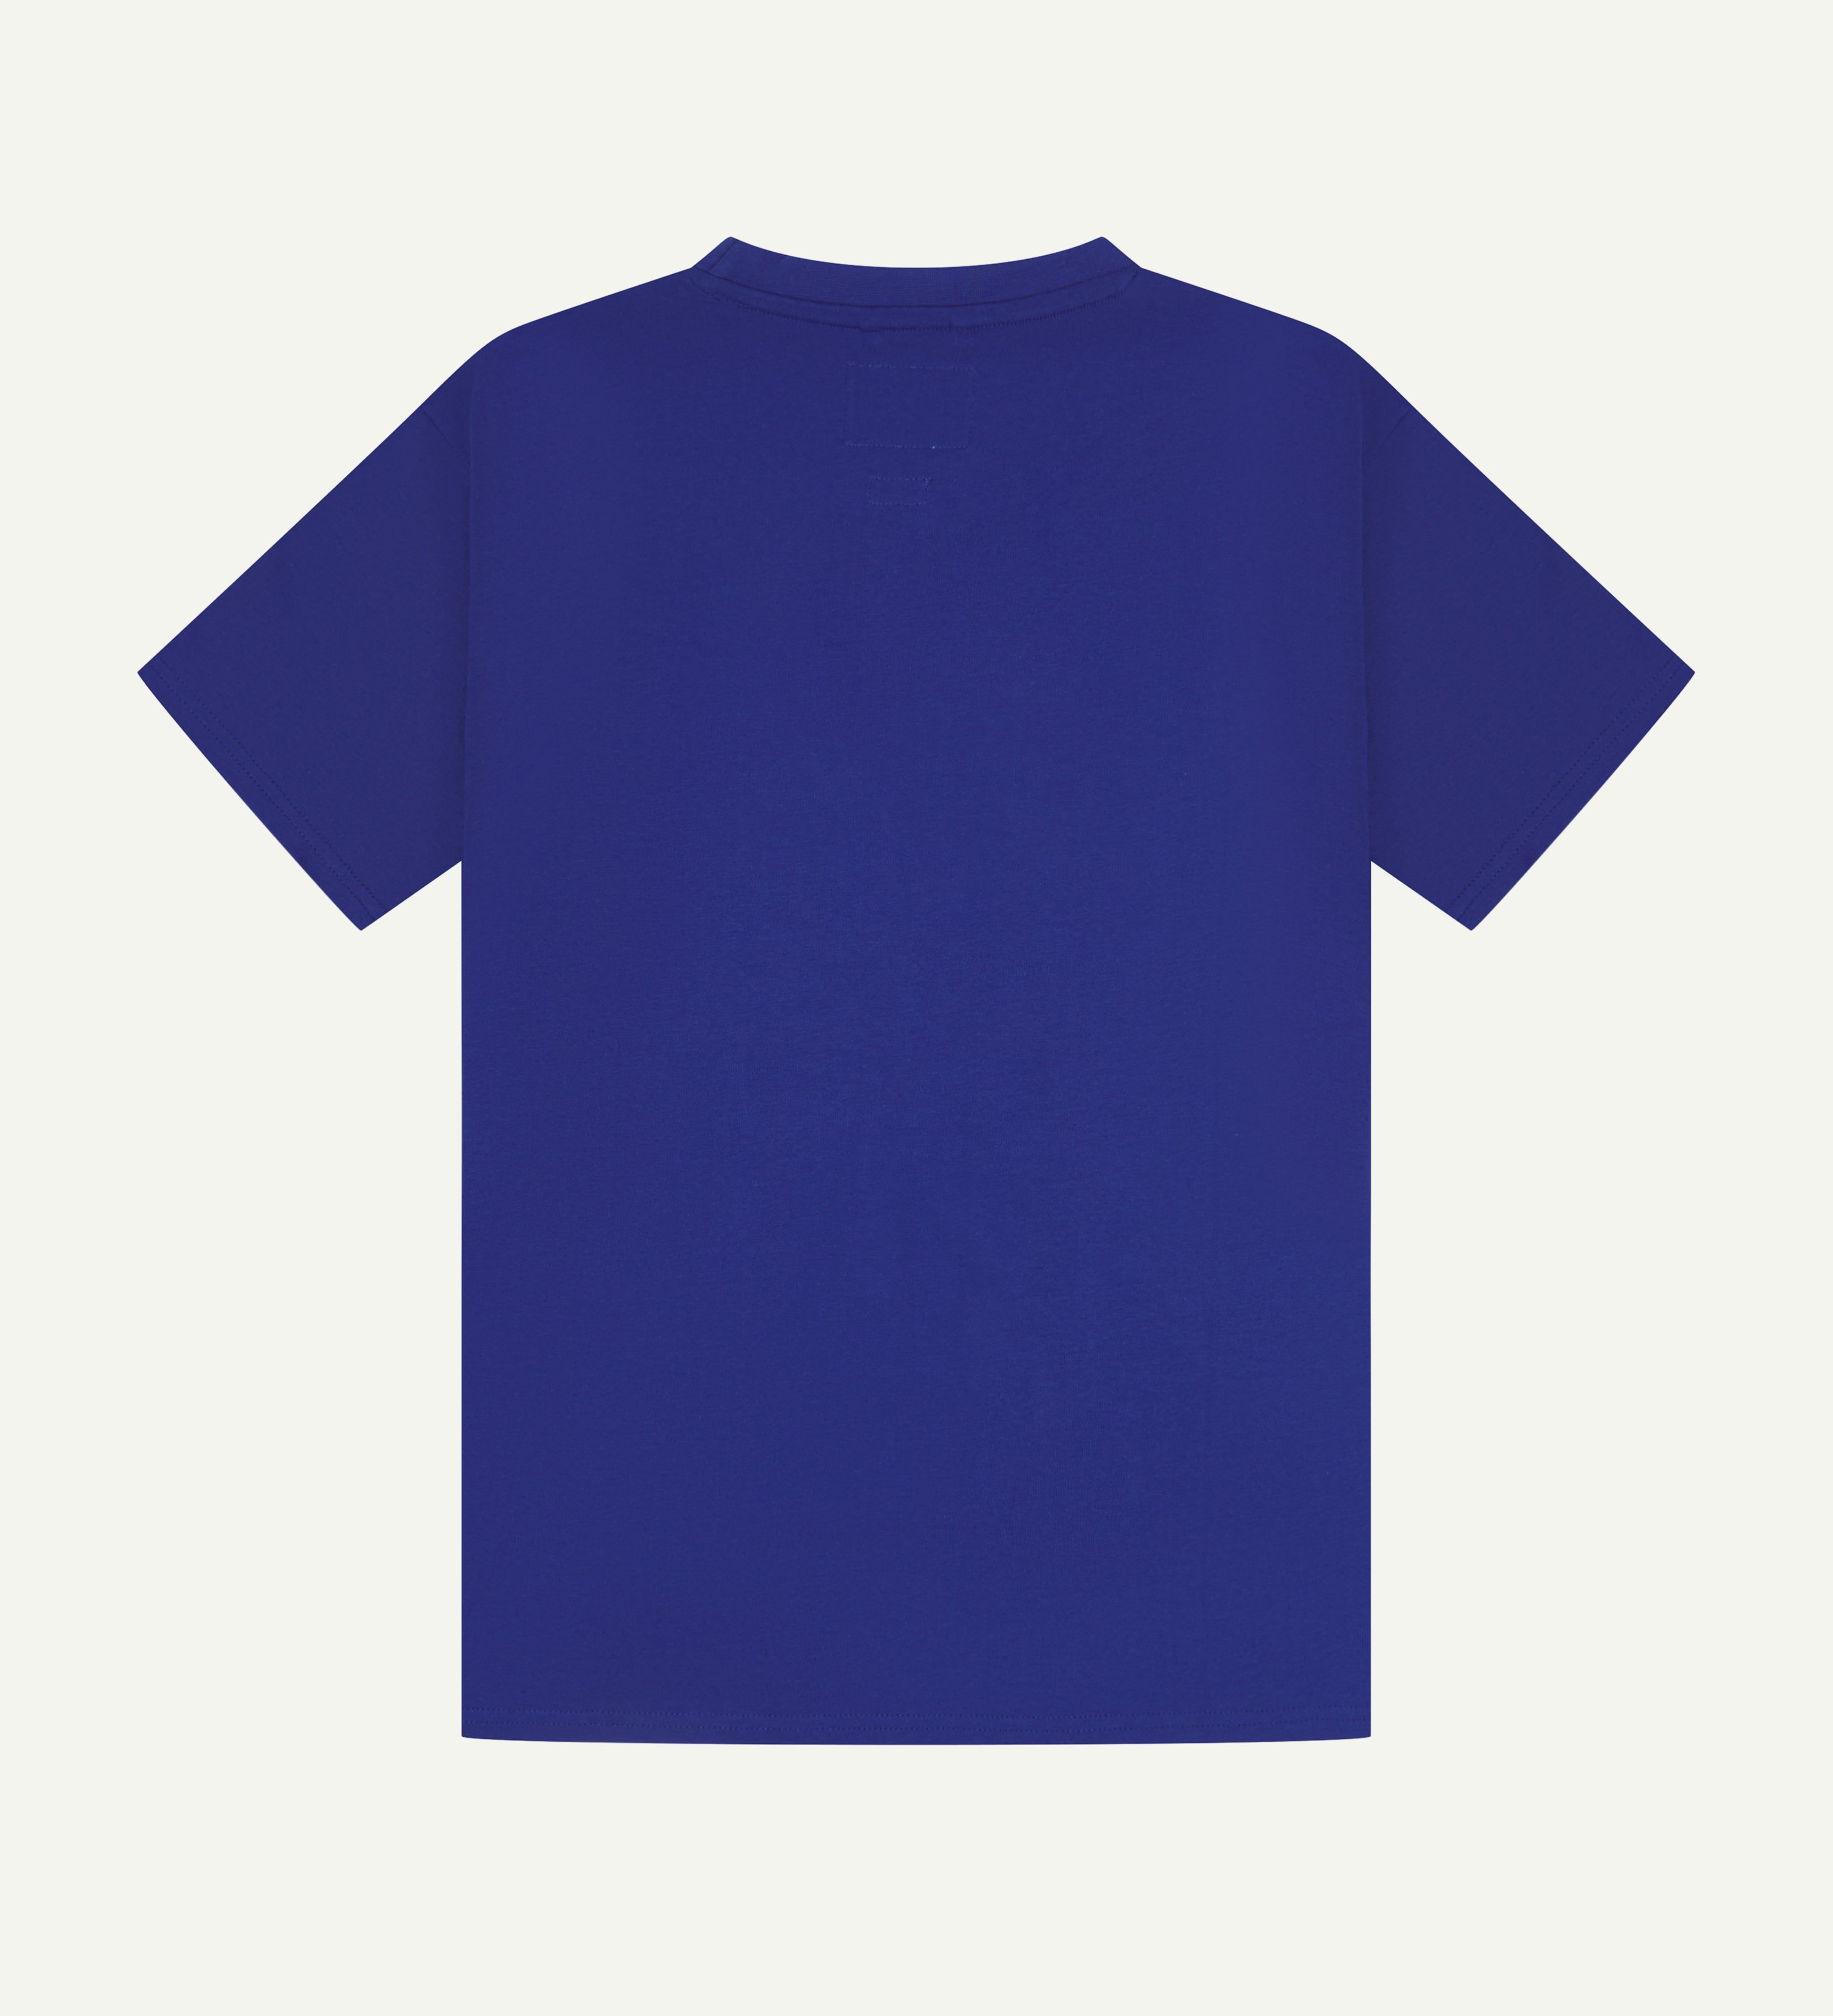 Back view of uskees #7006 men's short sleeve Tee in bright blue